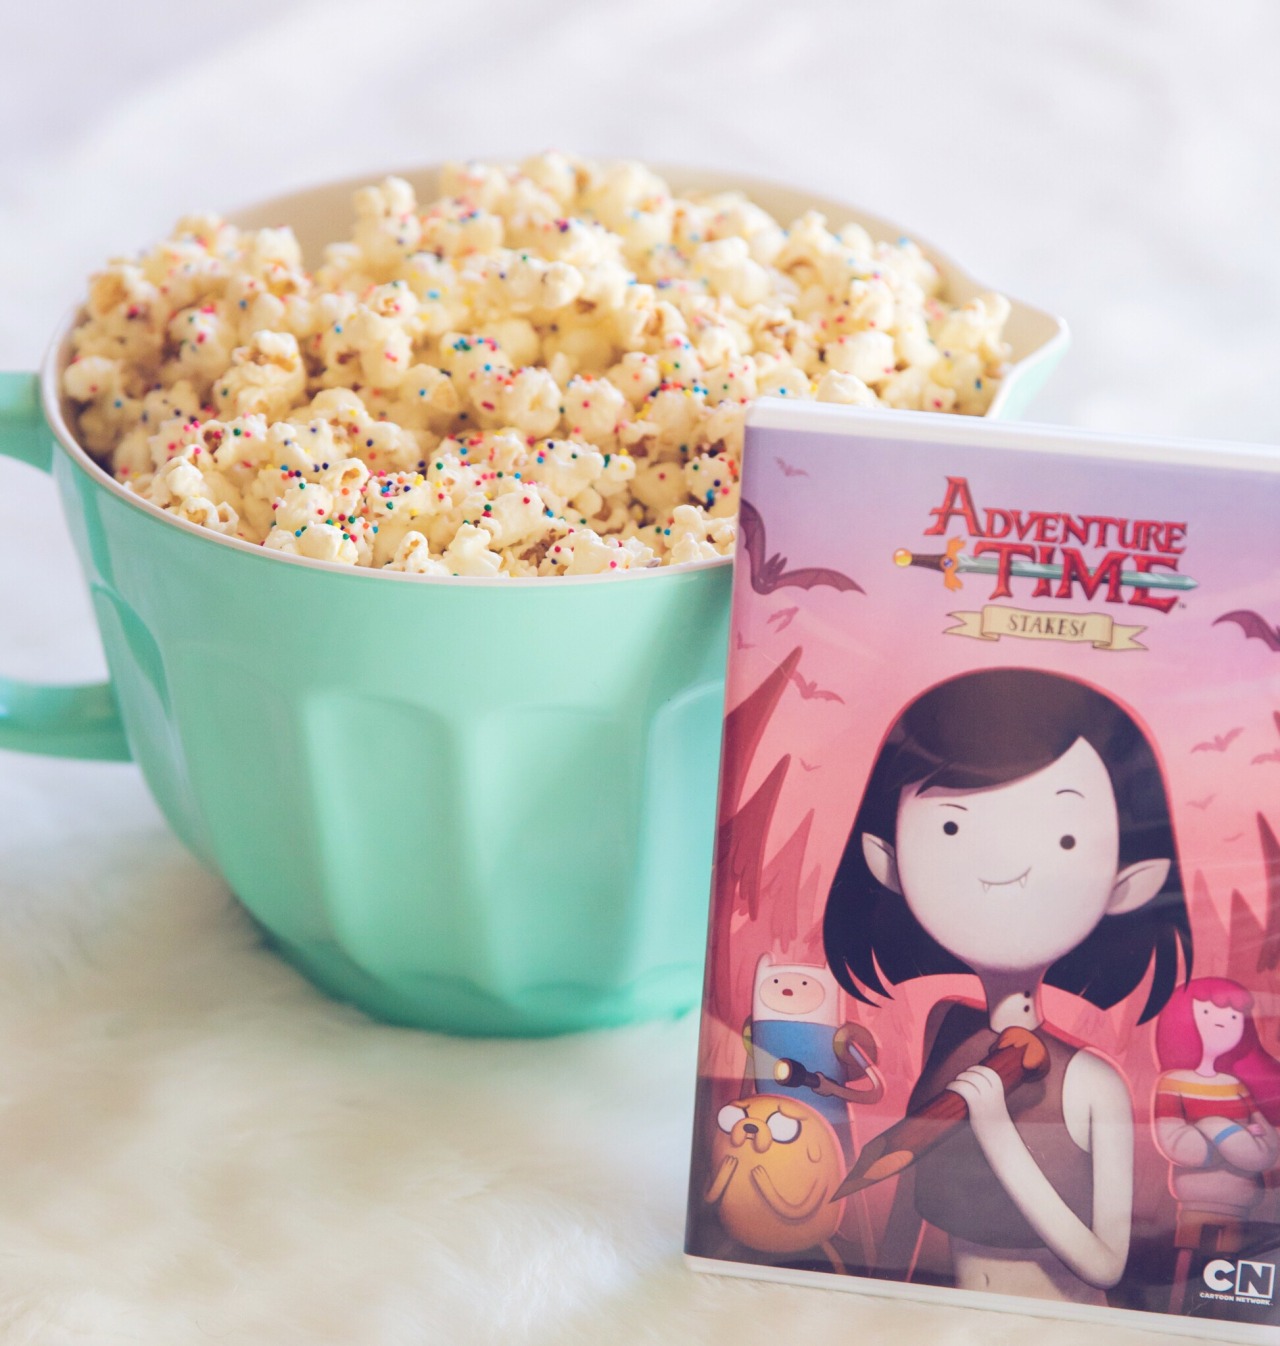 Celebrating National PopCorn Day with our fav Vampire Queen! Adventure Time Stakes